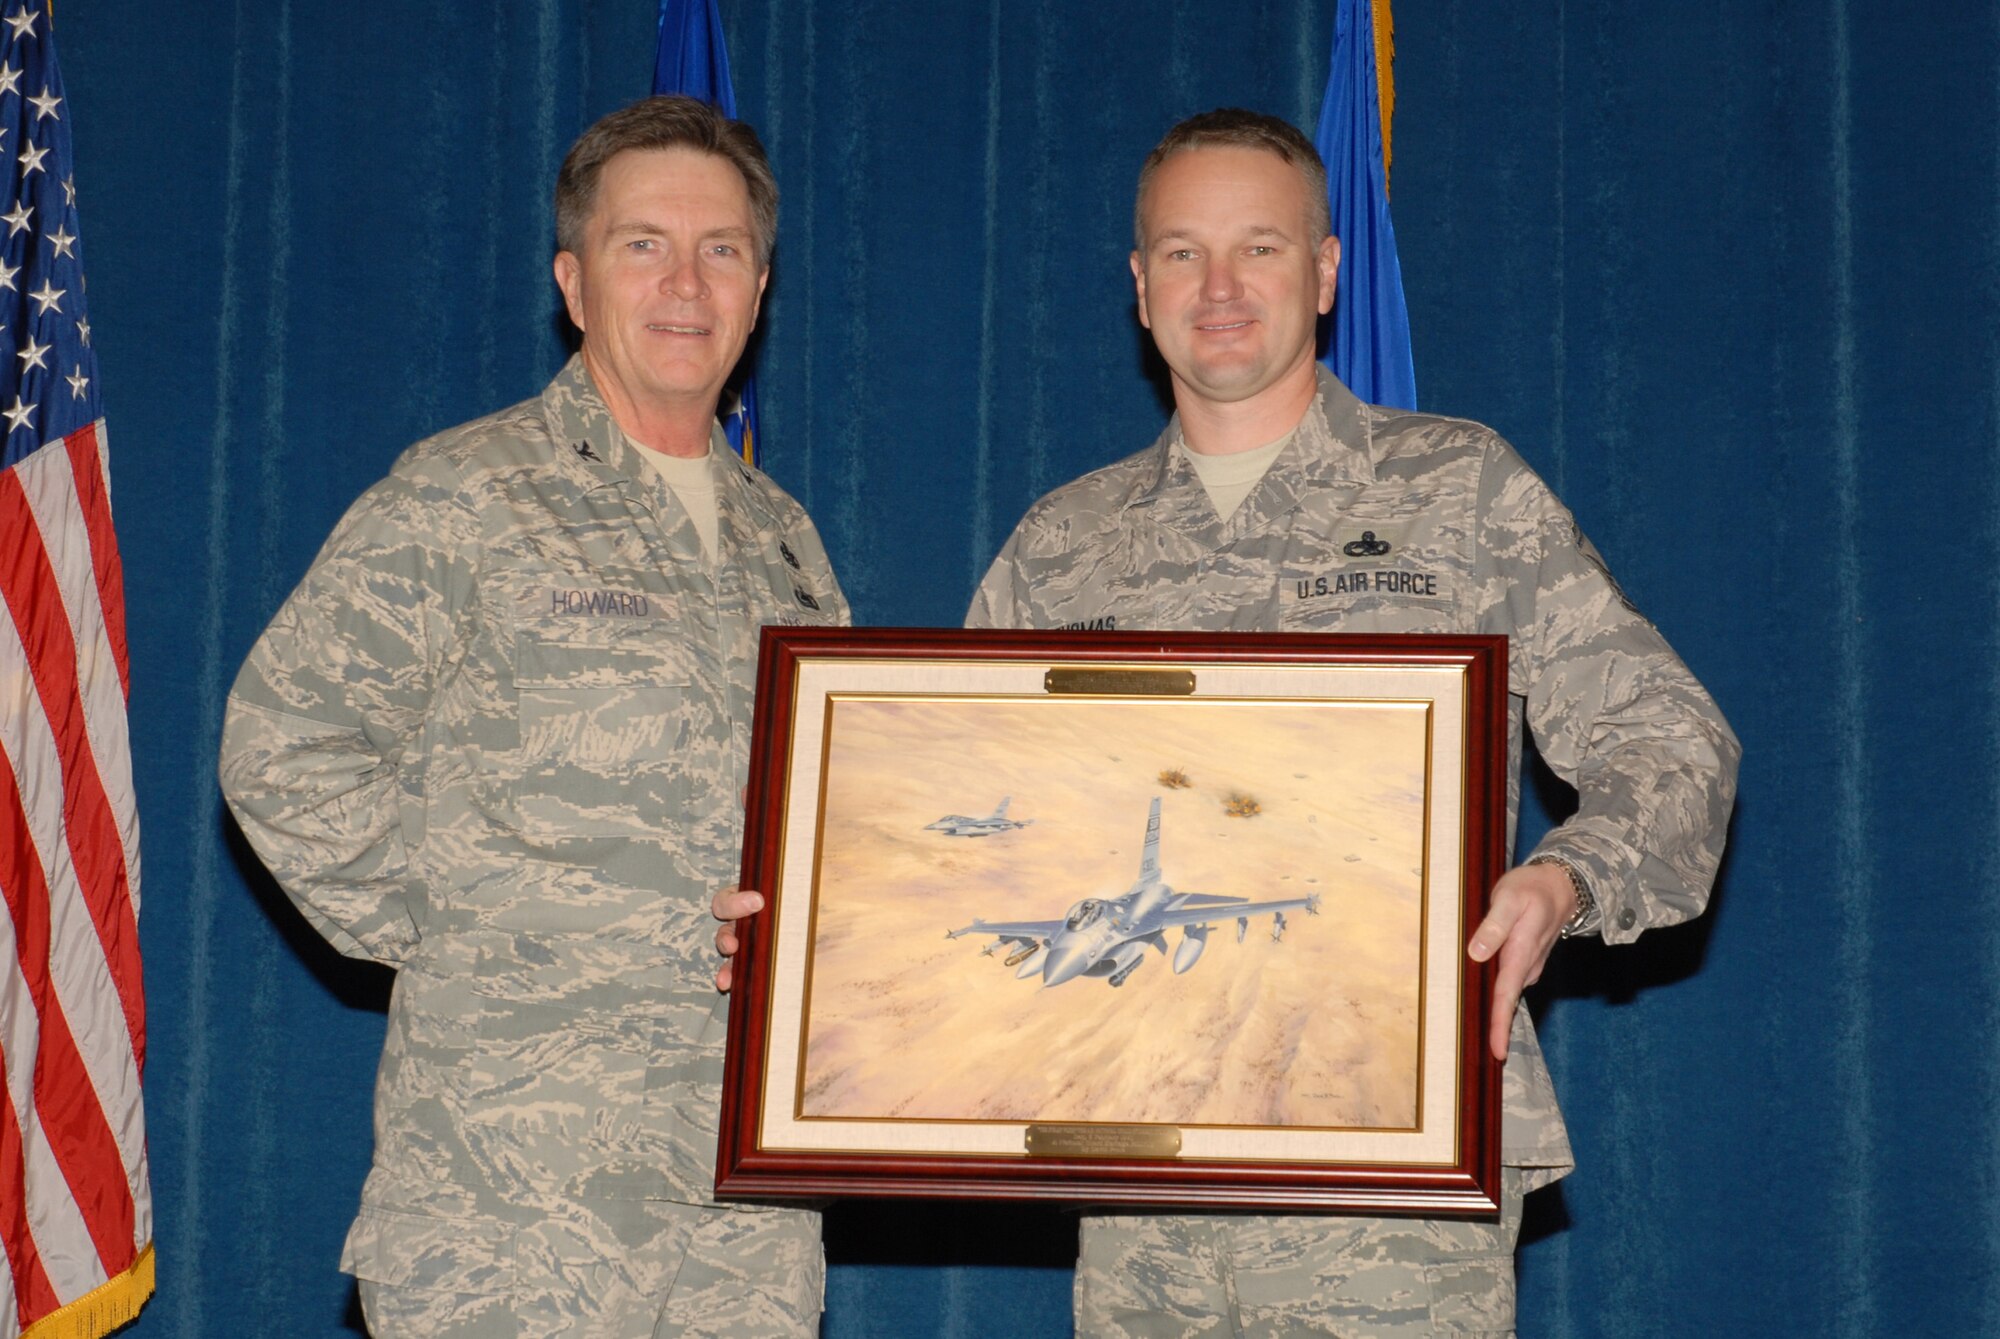 McGHEE TYSON AIR NATIONAL GUARD BASE, Tenn. -- Senior Master Sgt. Kevin Thomas, right, the director of resources for enlisted professional military education, receives a heritage painting from Col. Richard B. Howard, commander, upon his departure from assignment at The I.G. Brown Air National Guard Training and Education Center here, Dec. 18, 2009.  (U.S. Air Force photograph by Master Sgt. Mavi Smith/Released)